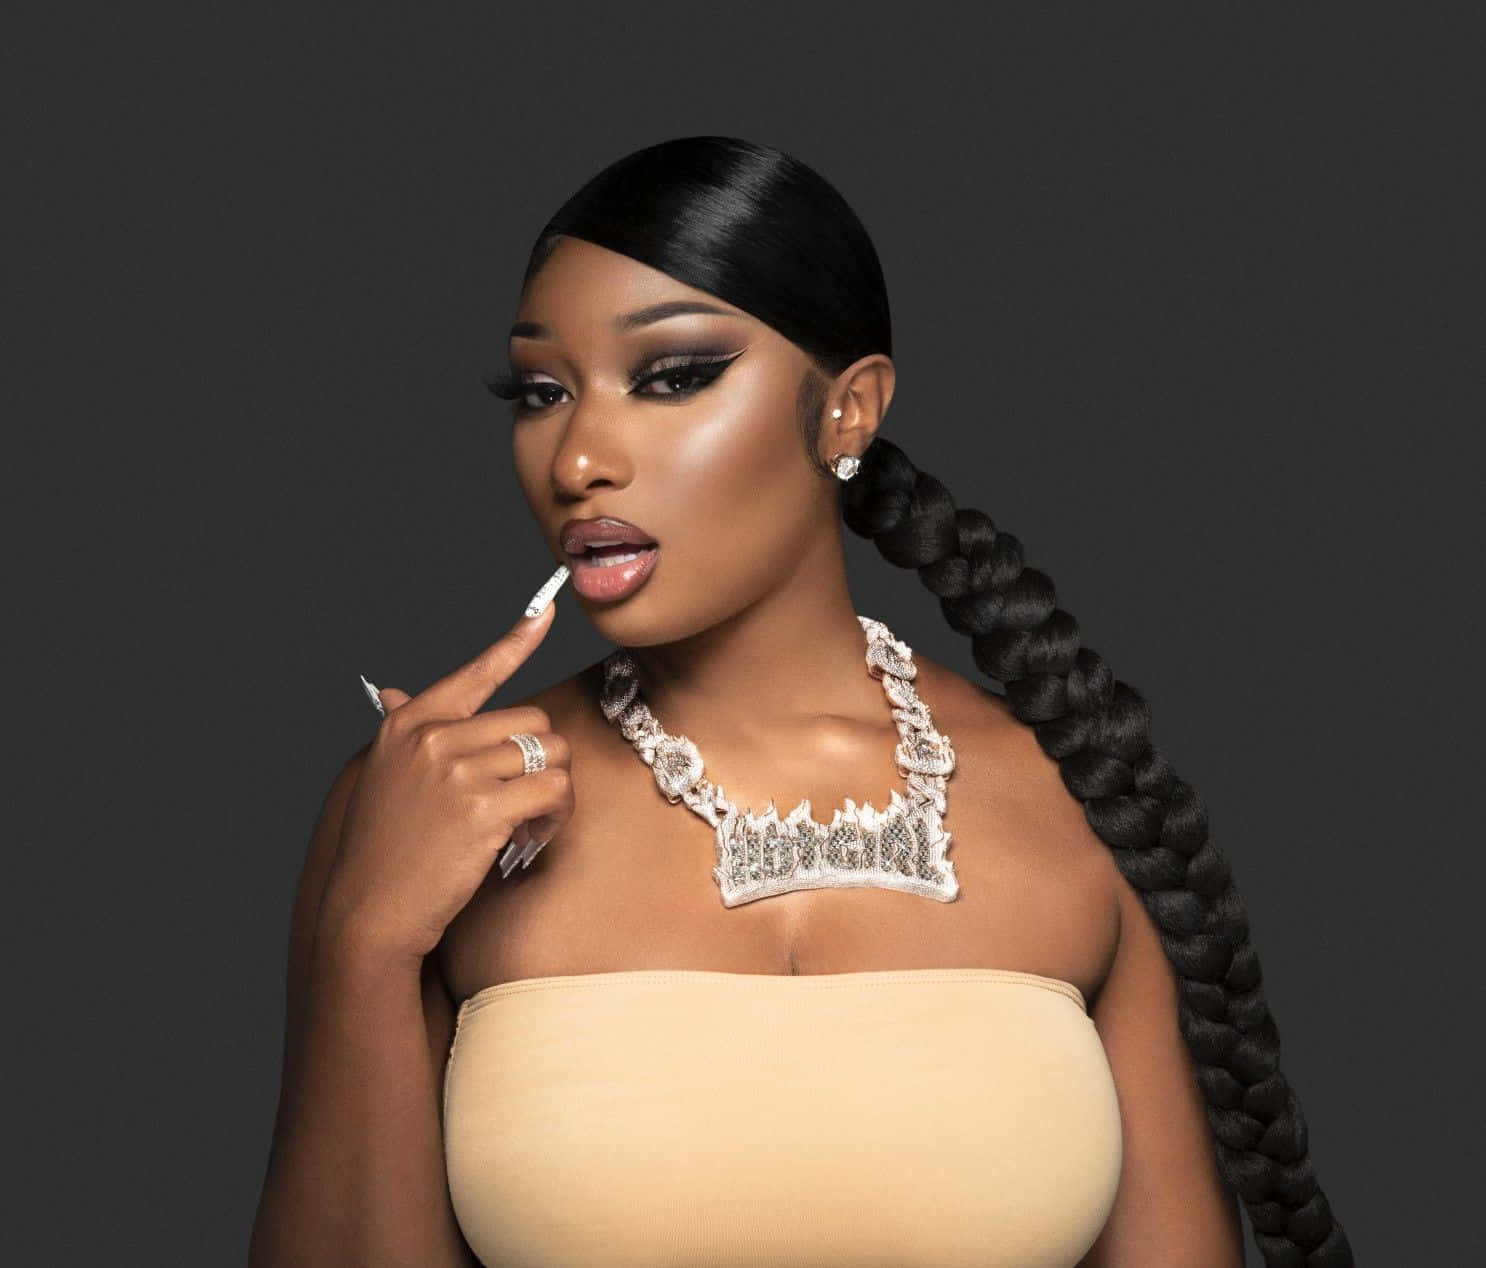 Captivating Megan Thee Stallion in an alluring pose